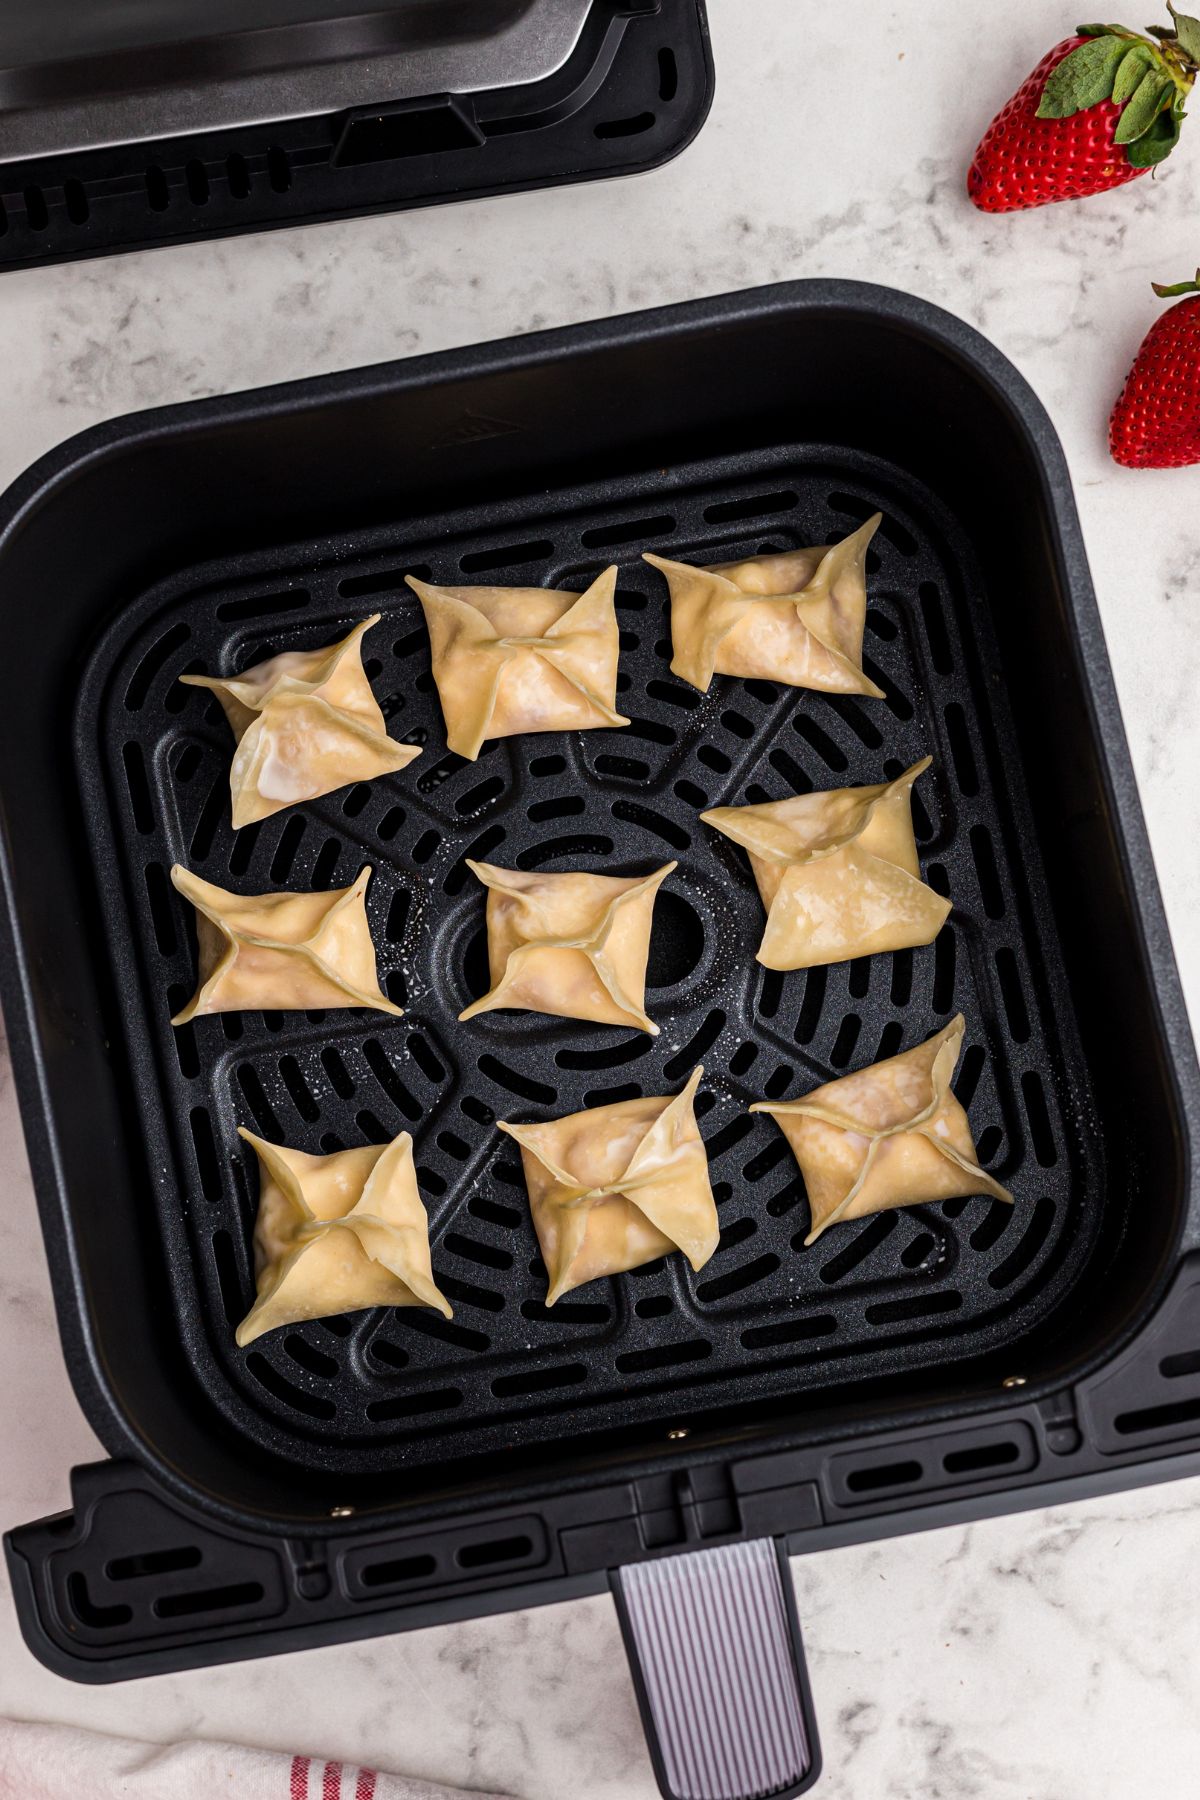 Uncooked stuffed wontons in the air fryer basket